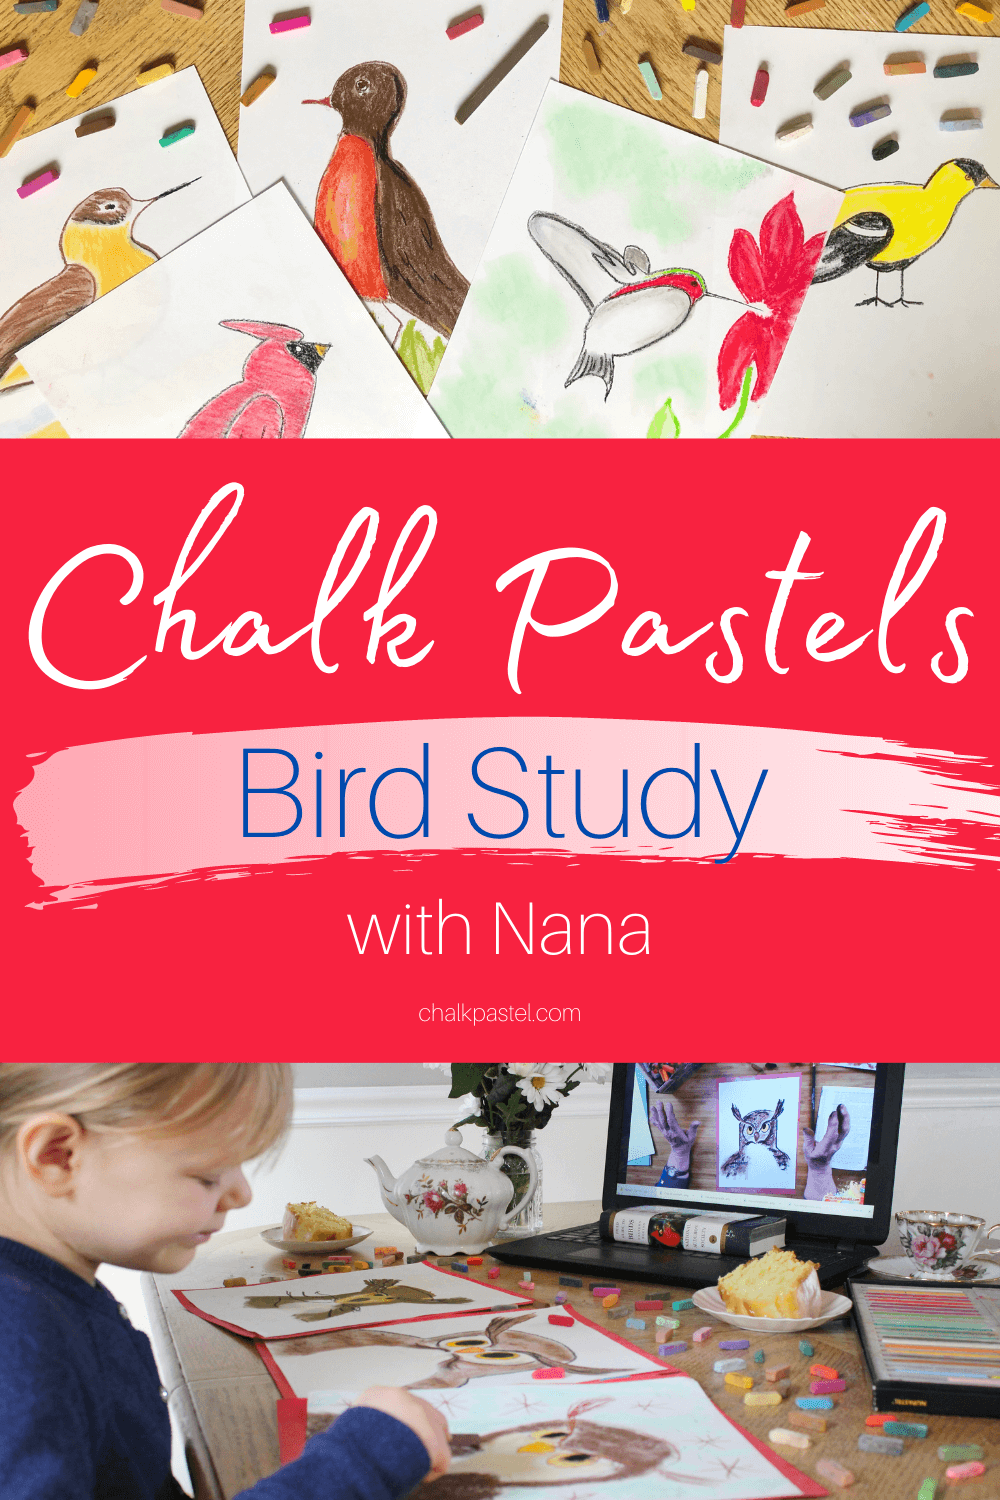 Chalk Pastels Bird Study with Nana: A chalk pastels bird study with Nana is a wonderful way to introduce bird art lessons to your kids. Chalk pastels are perfect for preschoolers to adults. They are super easy to use with no long art supply list needed. You'll love adding these vibrant birds to your next nature study or in preparation for the Great Backyard Bird Count! #chalkpastels #YouAREAnArtist #birdartlessons #birdartlessonsforkids #birdnaturestudy #backyardbirds #birdlessons #ChalkPastelsBirdStudywithNana